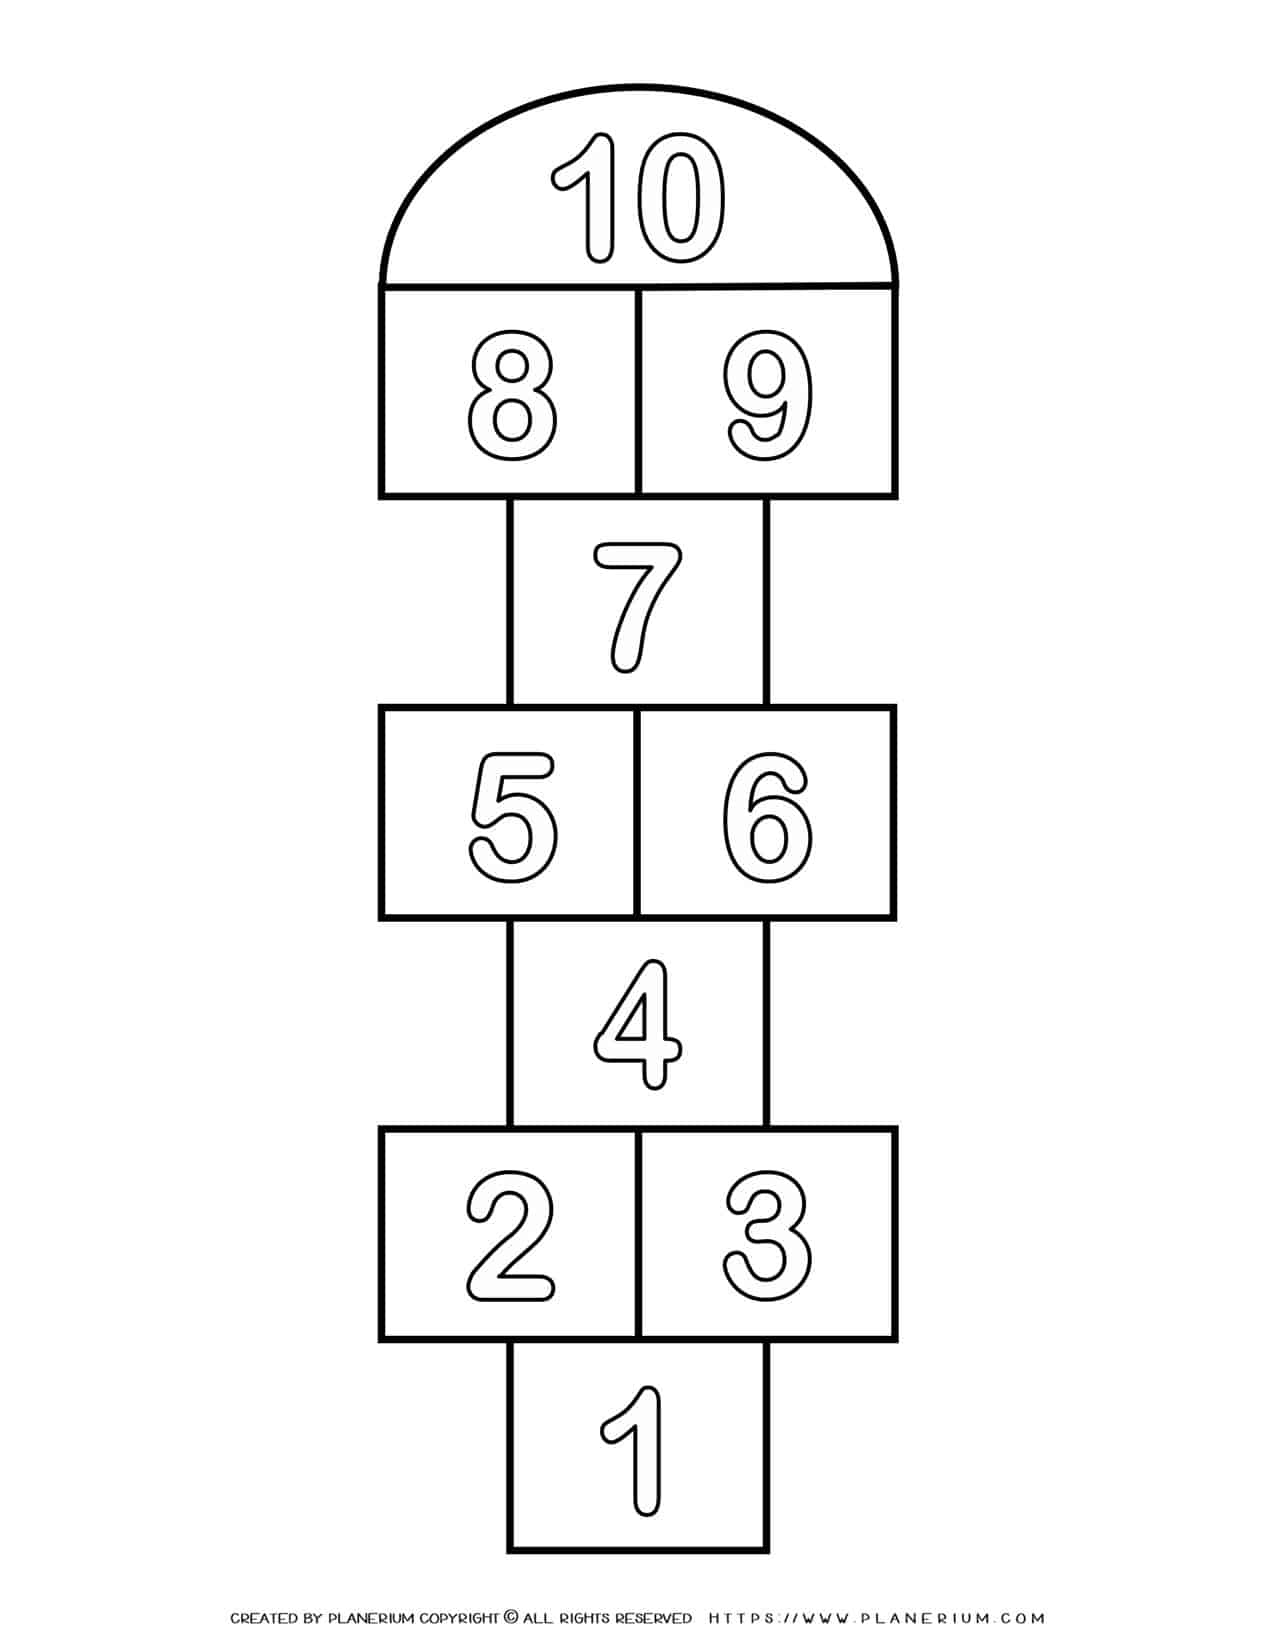 Numbers Game Board Template 1 10 Free Printable Planerium